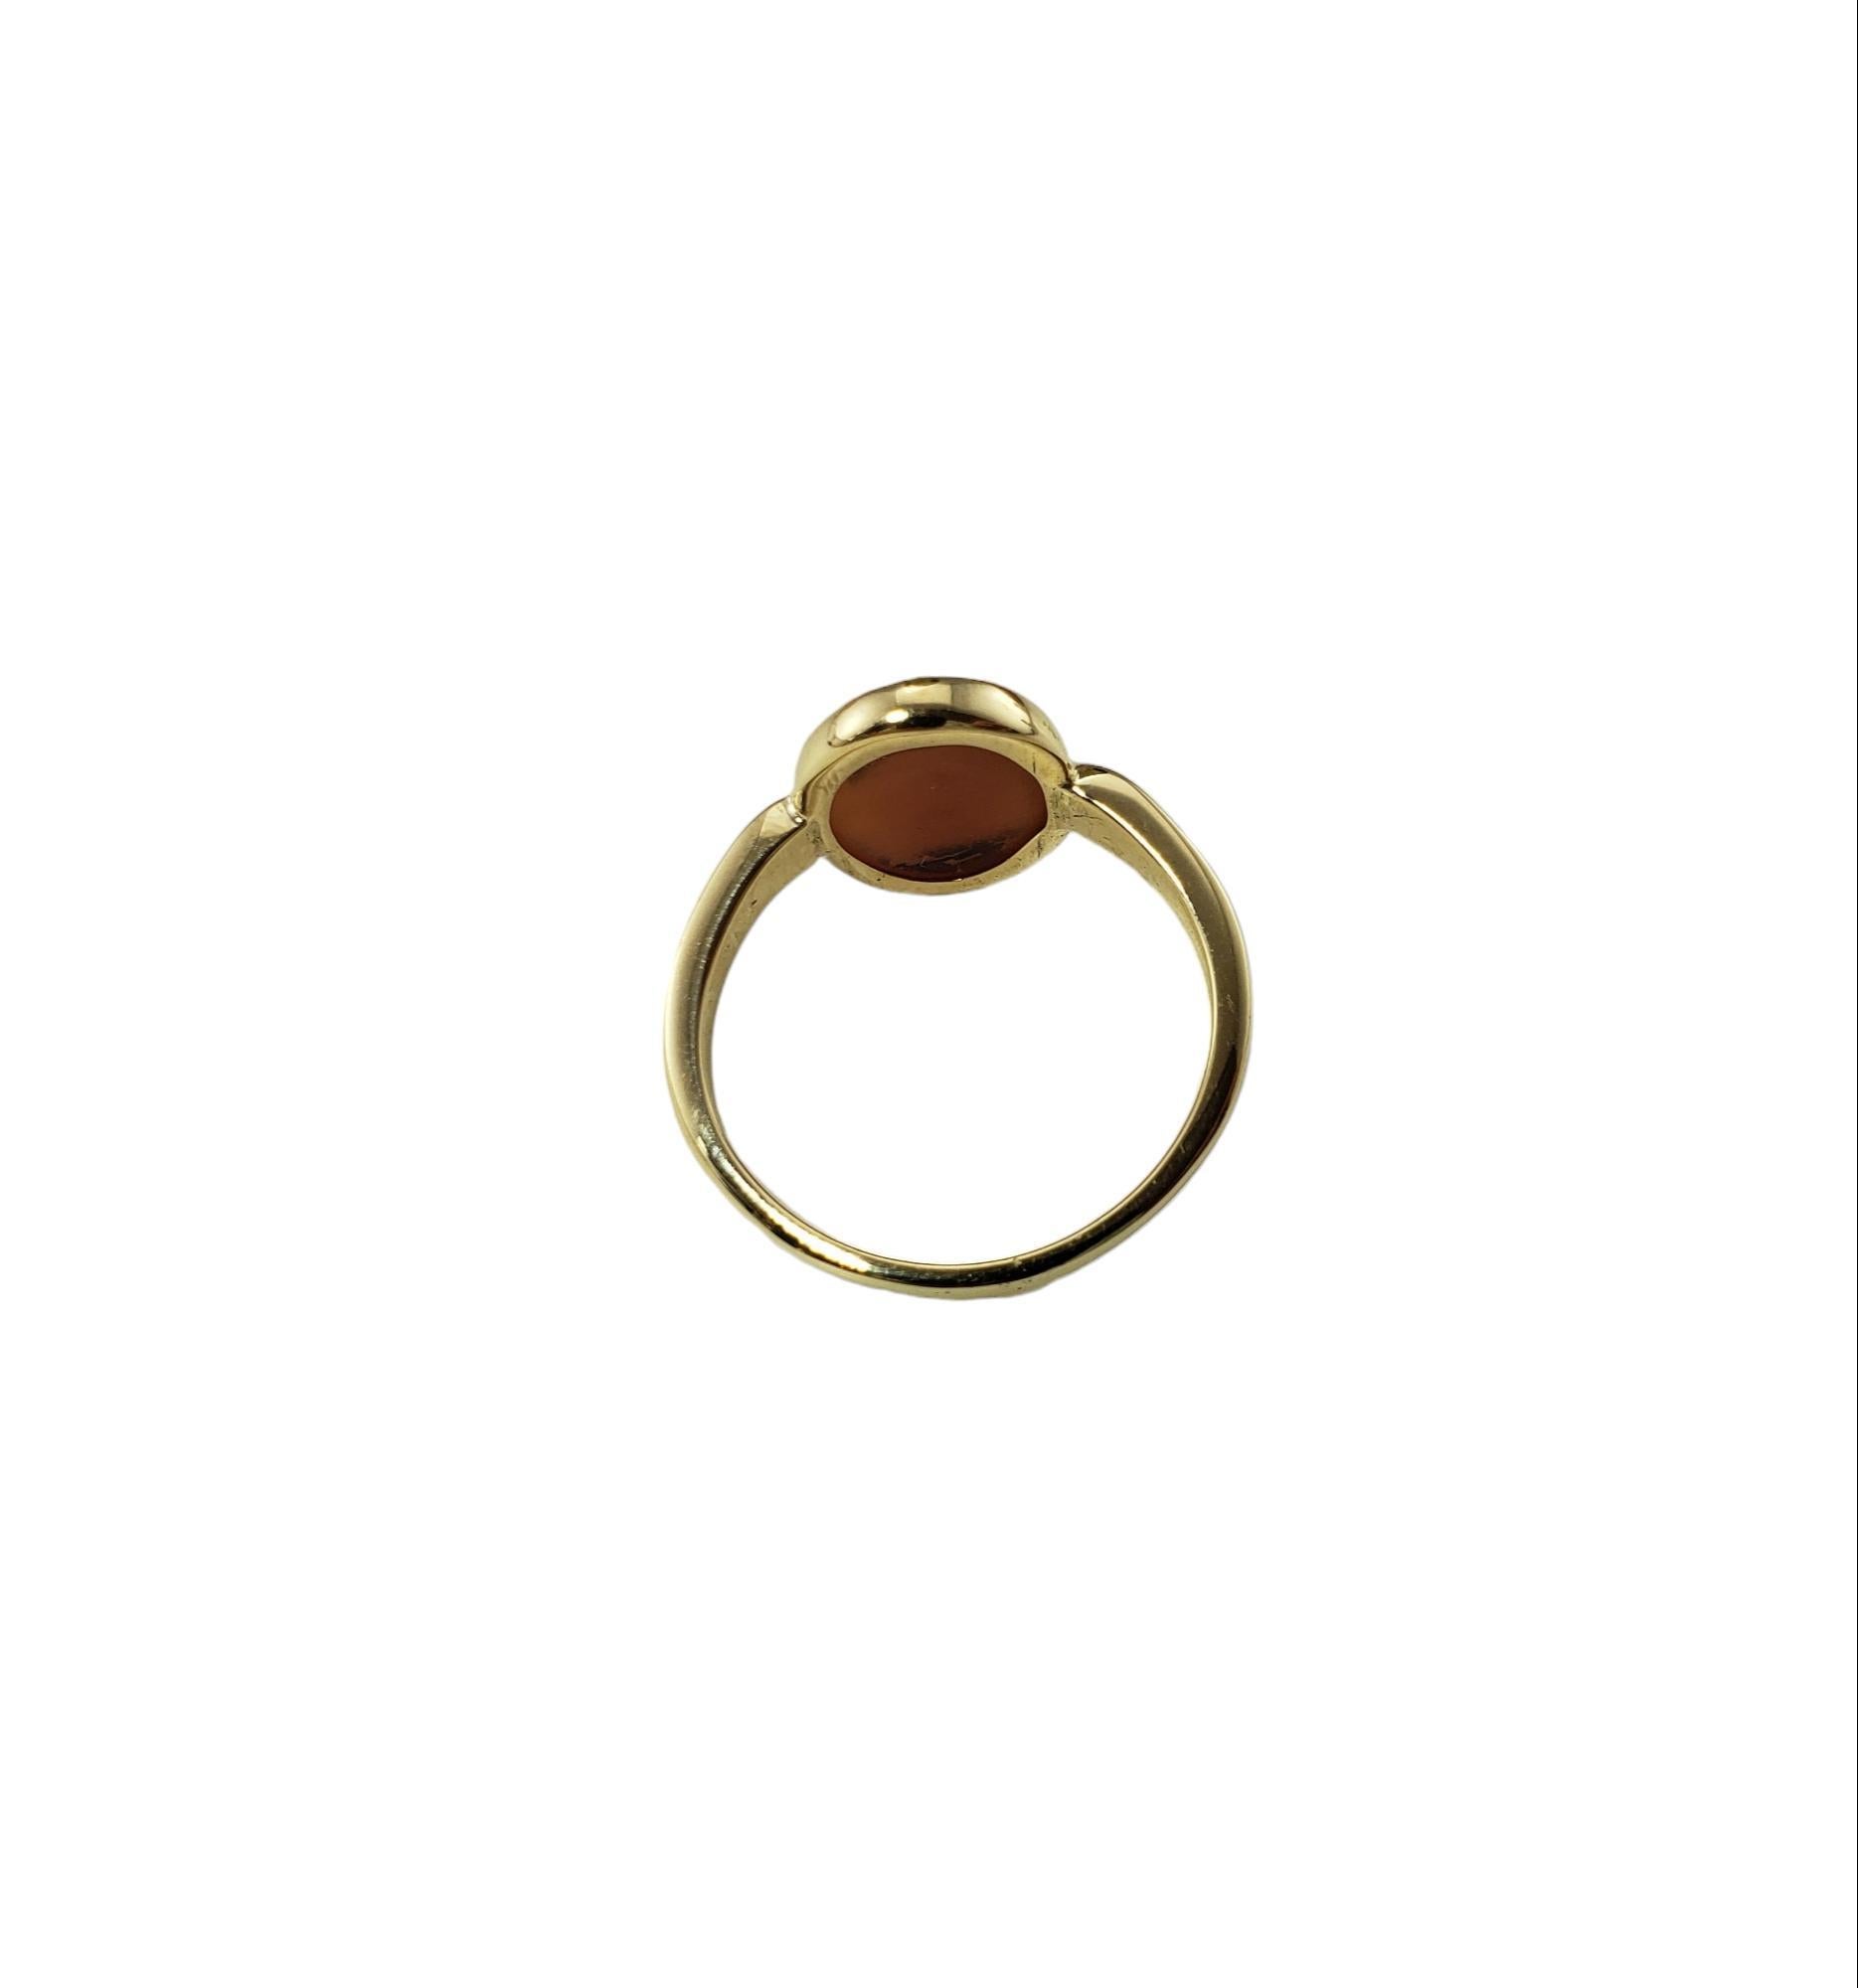 10 Karat Yellow Gold Cameo Ring Size 8.5 #15506 For Sale 1